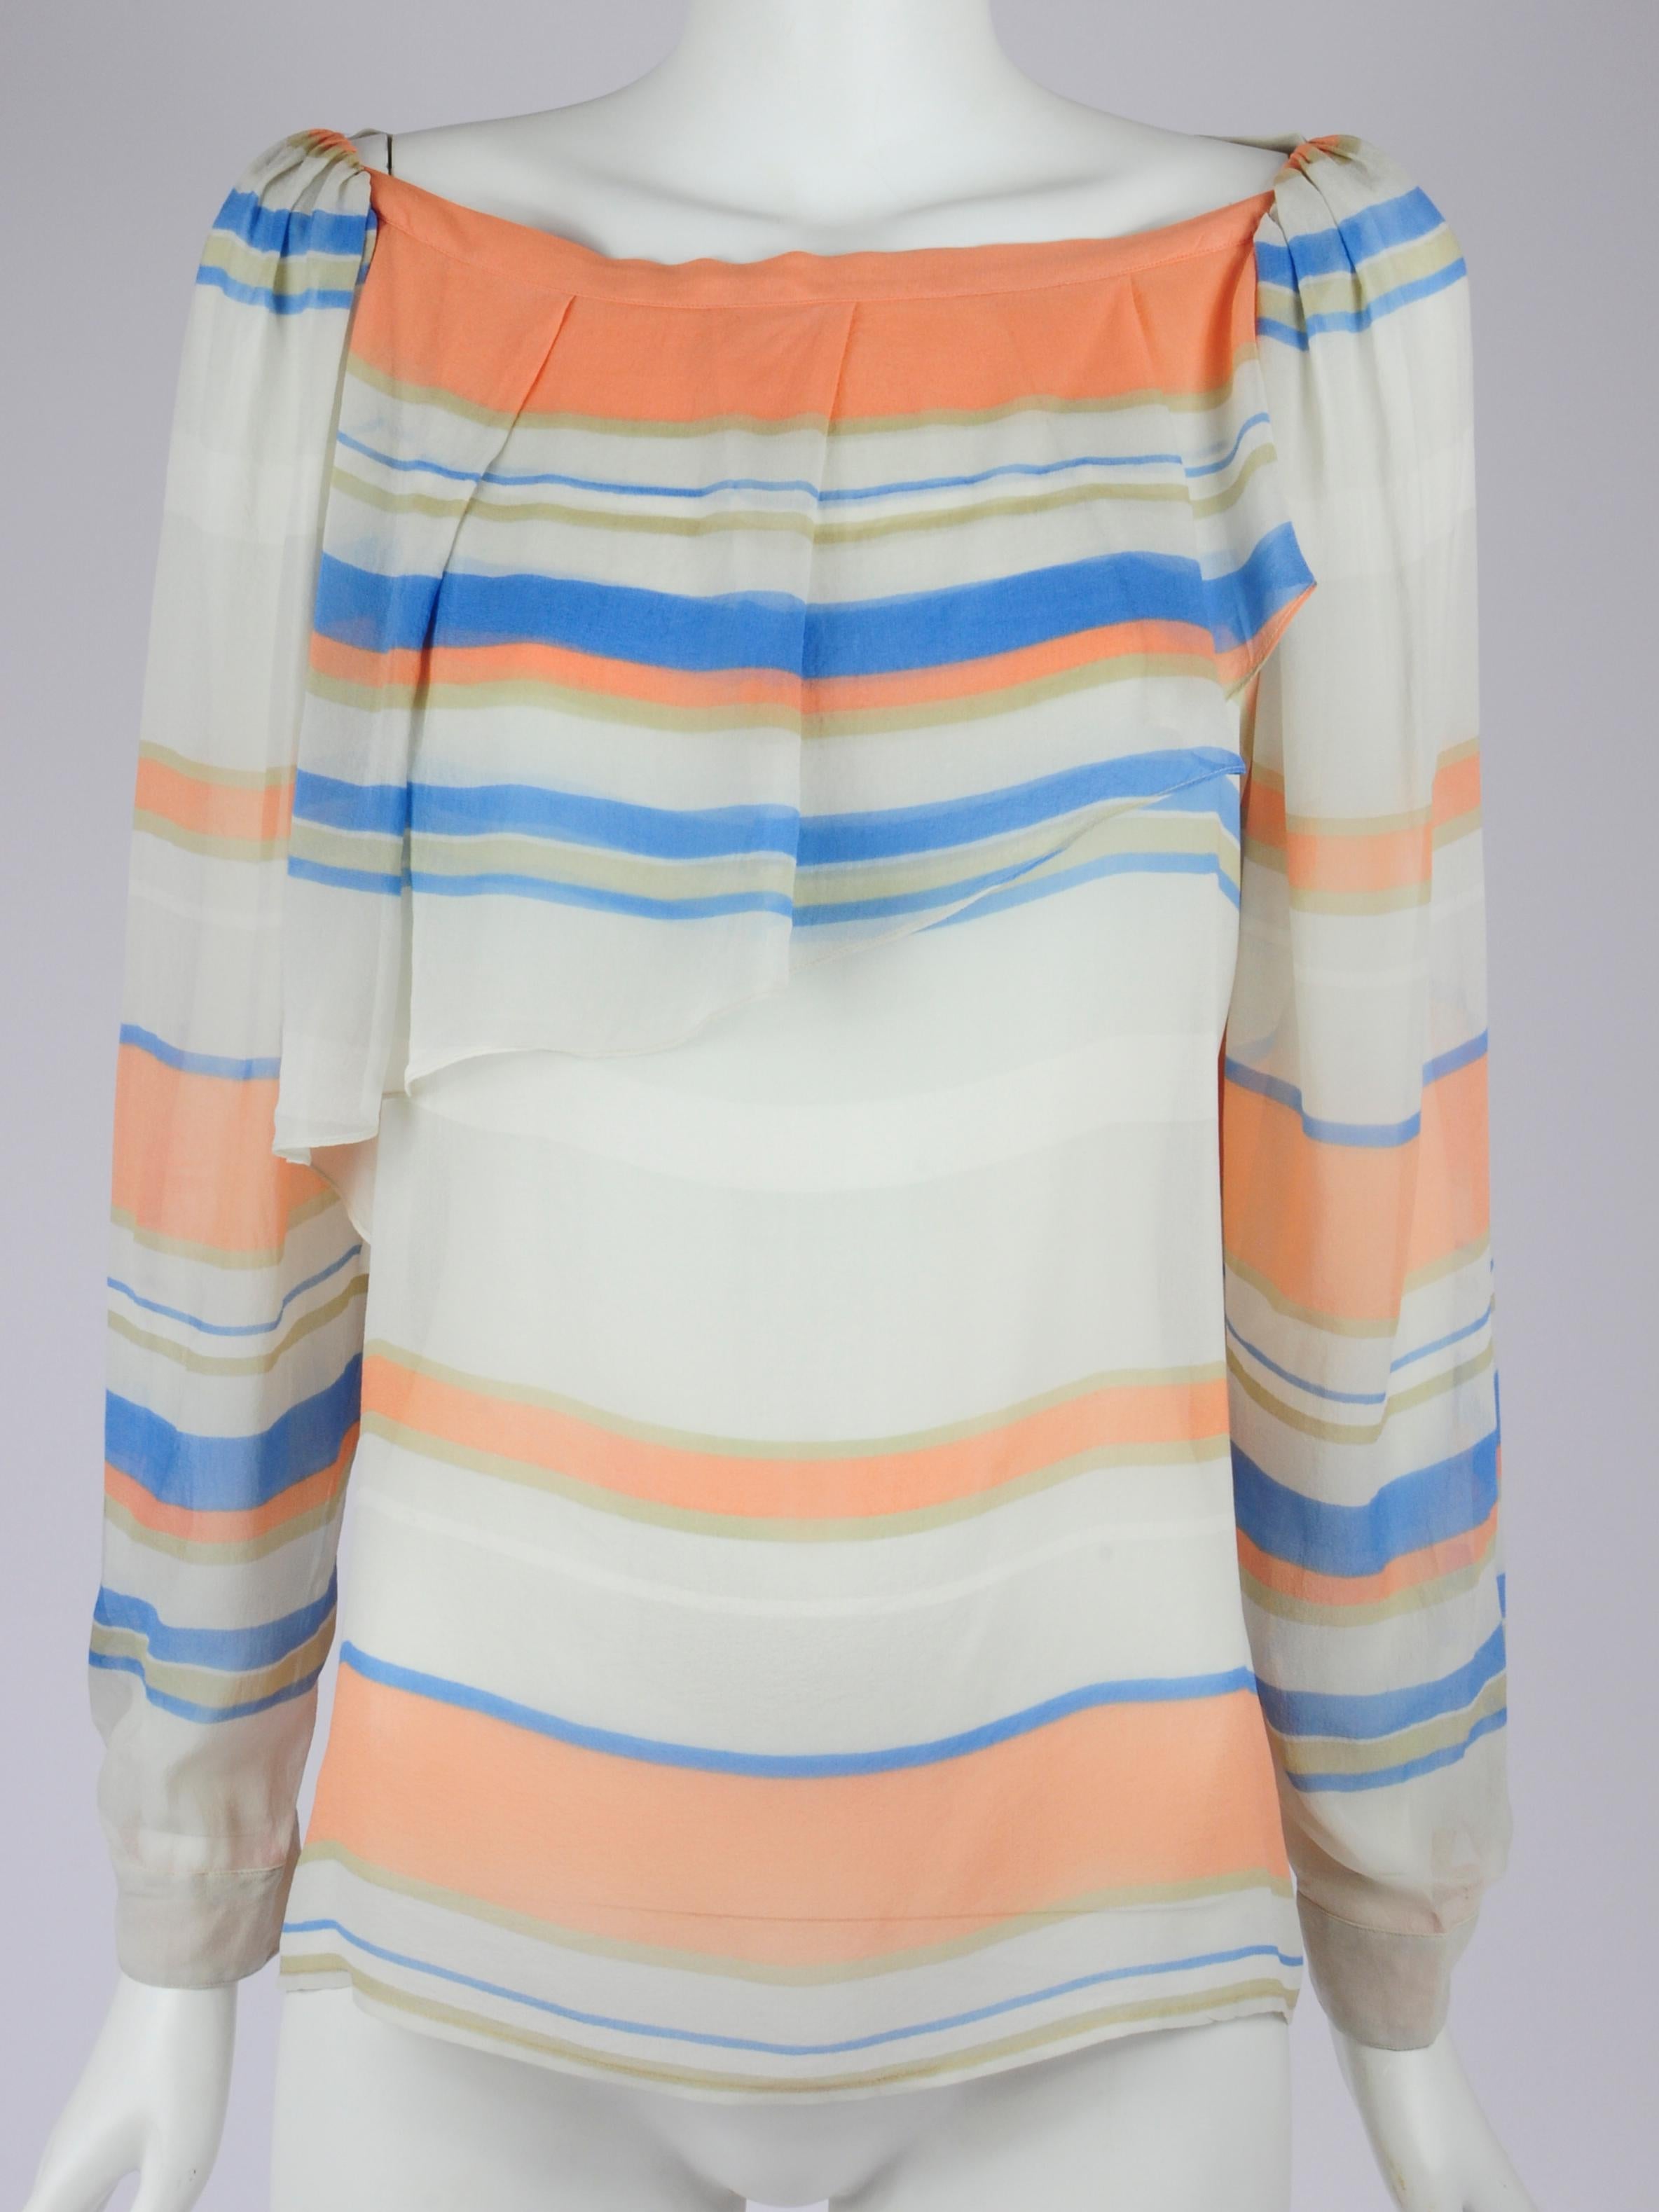 Christian Dior Silk Striped Blouse with Volant Detail by Marc Bohan 1970s For Sale 2